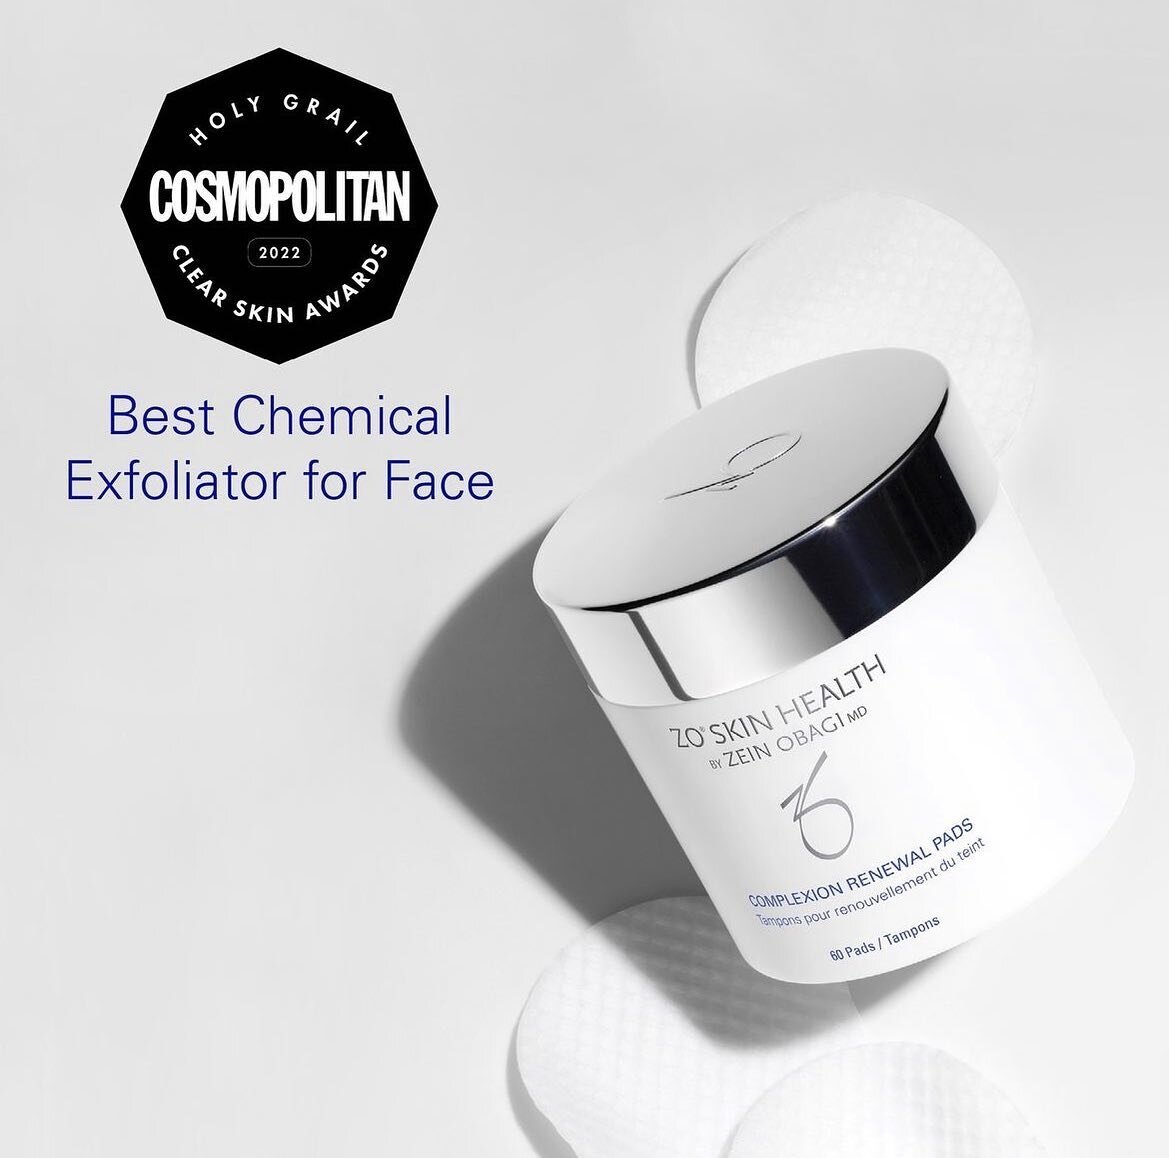 ZO Complexion Renewal Pads✨

A ZOfavorite earned its spot as Best Chemical Exfoliator for Face in @cosmopolitan 's 2022 Holy Grail Clear Skin Awards. Experience clearer skin with Complexion Renewal Pads-swipe a pre-soaked pad over the face, AM + PM, 